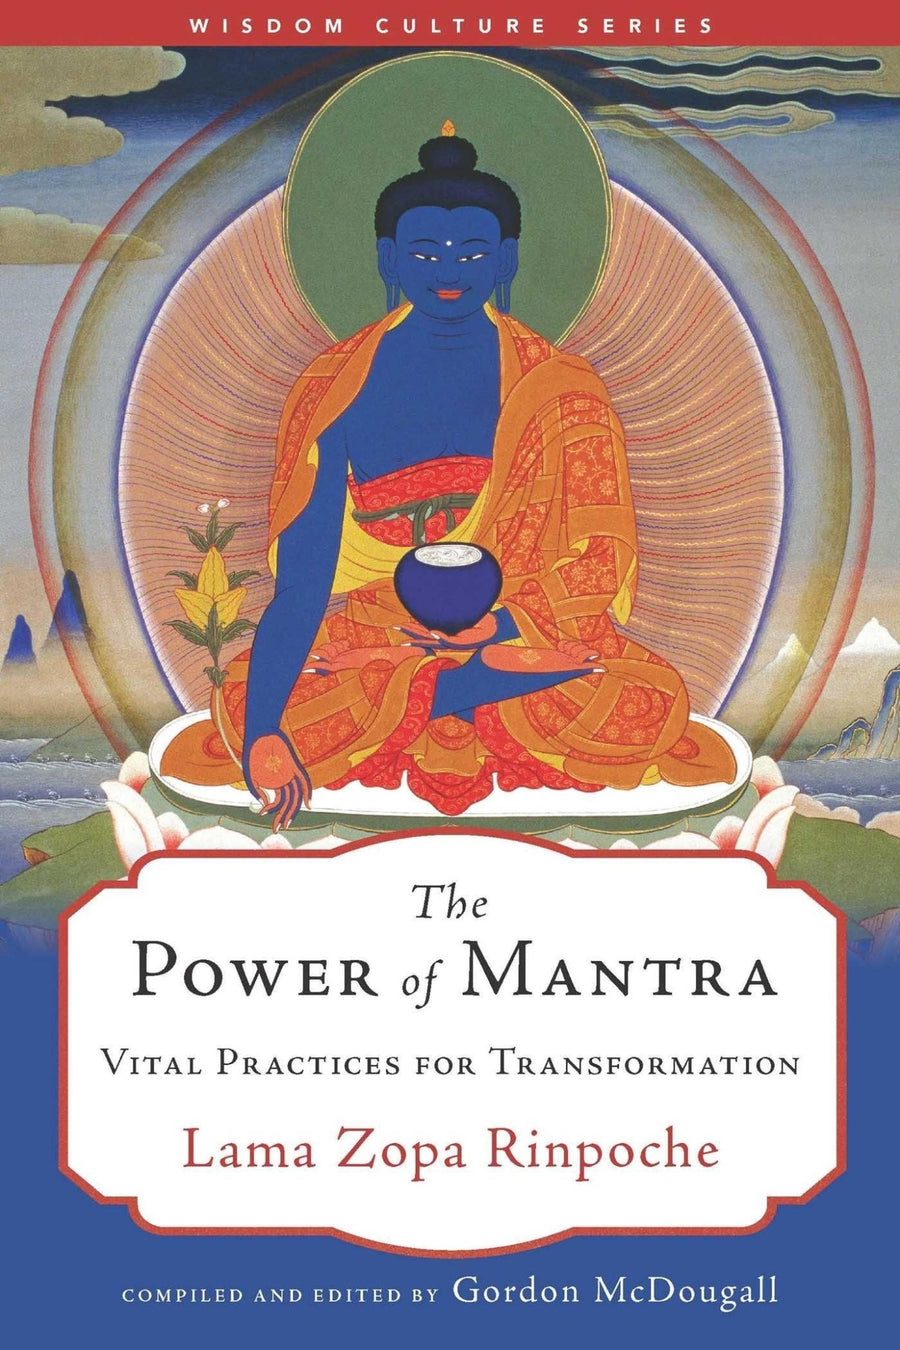 Lama Zopa Rinpoche: The Power of Mantra - Atelier Tibet